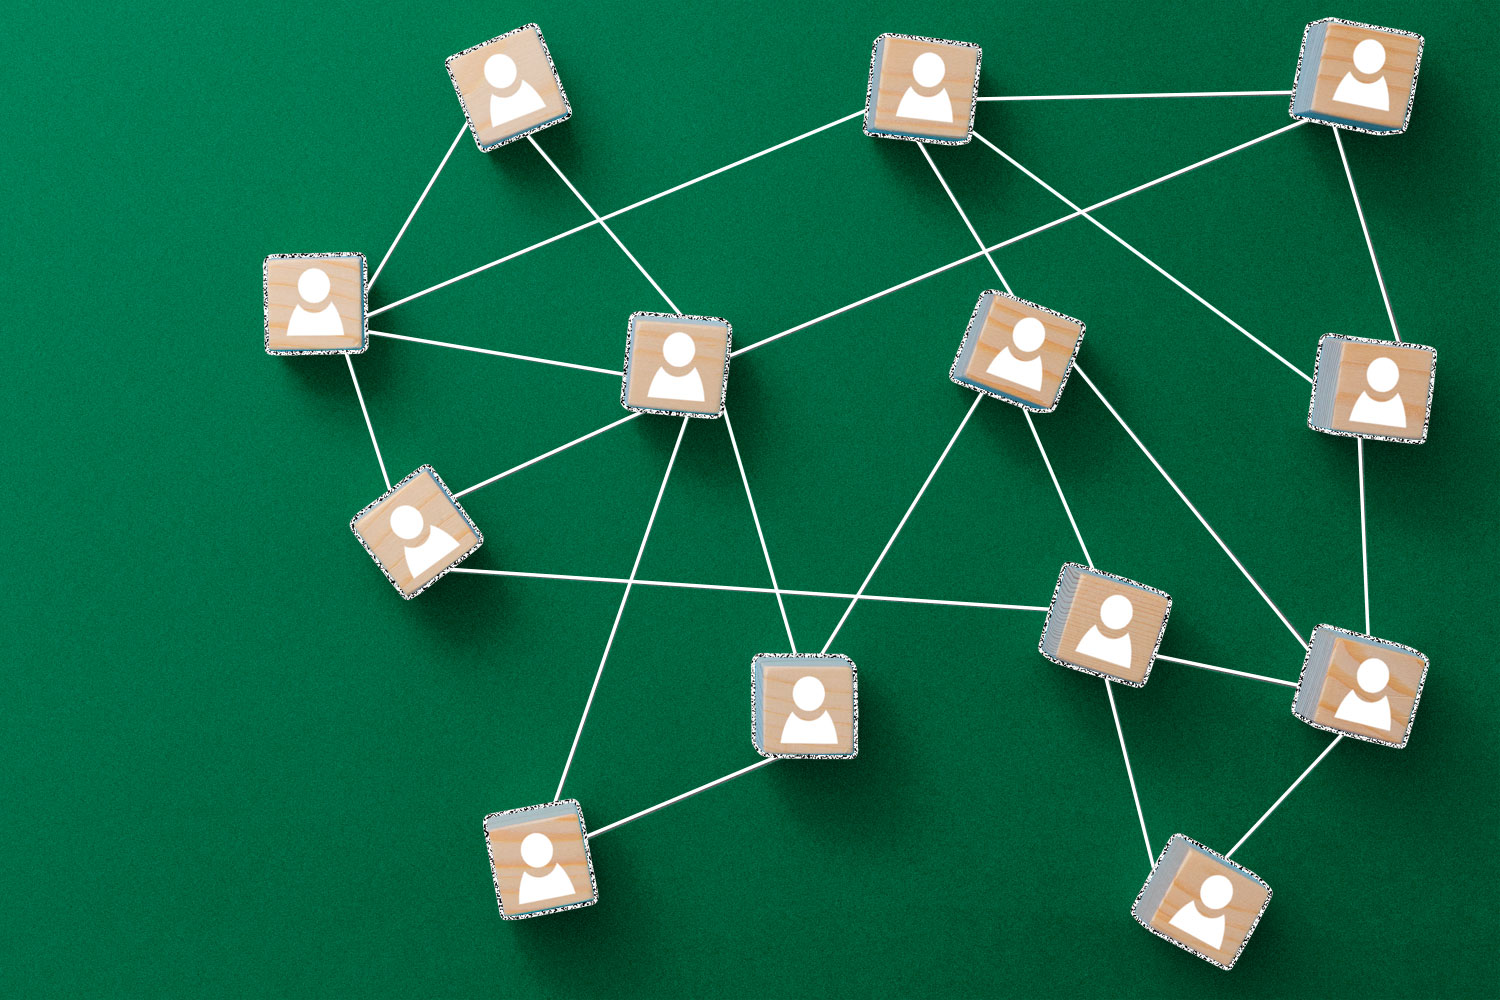 Square wooden blocks with people icons on them, connected by white lines to represent a network, on a green background